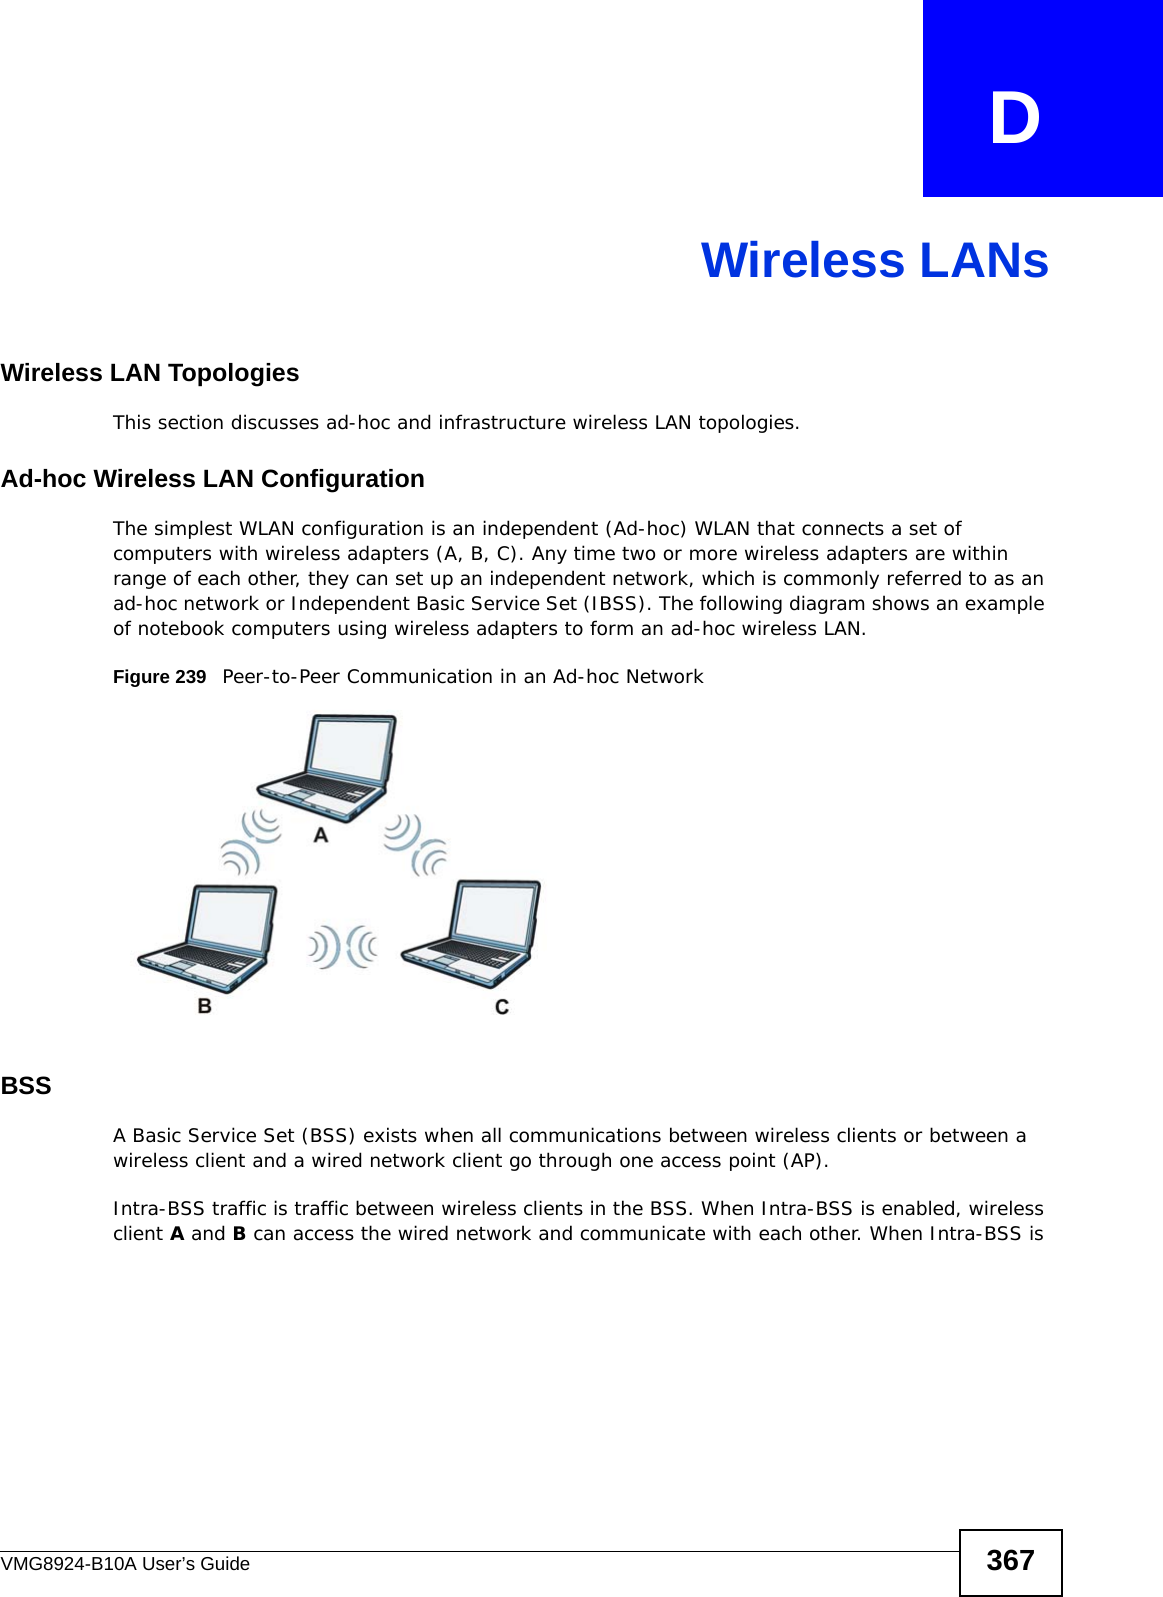 VMG8924-B10A User’s Guide 367APPENDIX   DWireless LANsWireless LAN TopologiesThis section discusses ad-hoc and infrastructure wireless LAN topologies.Ad-hoc Wireless LAN ConfigurationThe simplest WLAN configuration is an independent (Ad-hoc) WLAN that connects a set of computers with wireless adapters (A, B, C). Any time two or more wireless adapters are within range of each other, they can set up an independent network, which is commonly referred to as an ad-hoc network or Independent Basic Service Set (IBSS). The following diagram shows an example of notebook computers using wireless adapters to form an ad-hoc wireless LAN. Figure 239   Peer-to-Peer Communication in an Ad-hoc NetworkBSSA Basic Service Set (BSS) exists when all communications between wireless clients or between a wireless client and a wired network client go through one access point (AP). Intra-BSS traffic is traffic between wireless clients in the BSS. When Intra-BSS is enabled, wireless client A and B can access the wired network and communicate with each other. When Intra-BSS is 